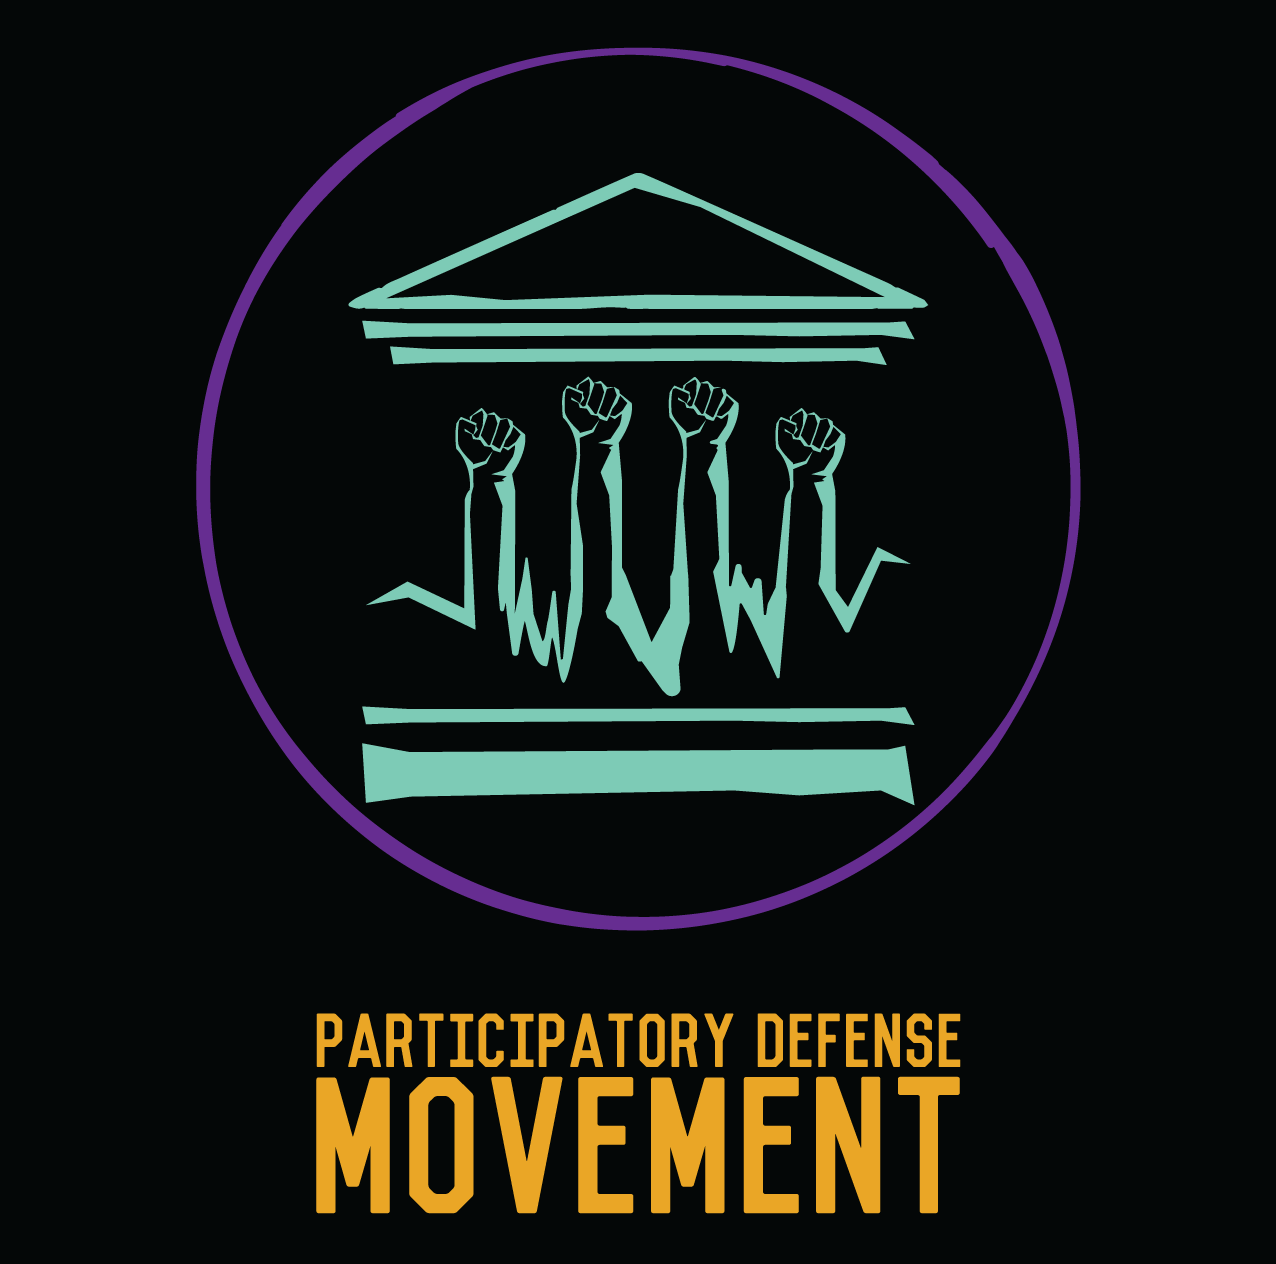 Participatory Defense Movement (black logo with fists as pillars holding up a courthouse roof)